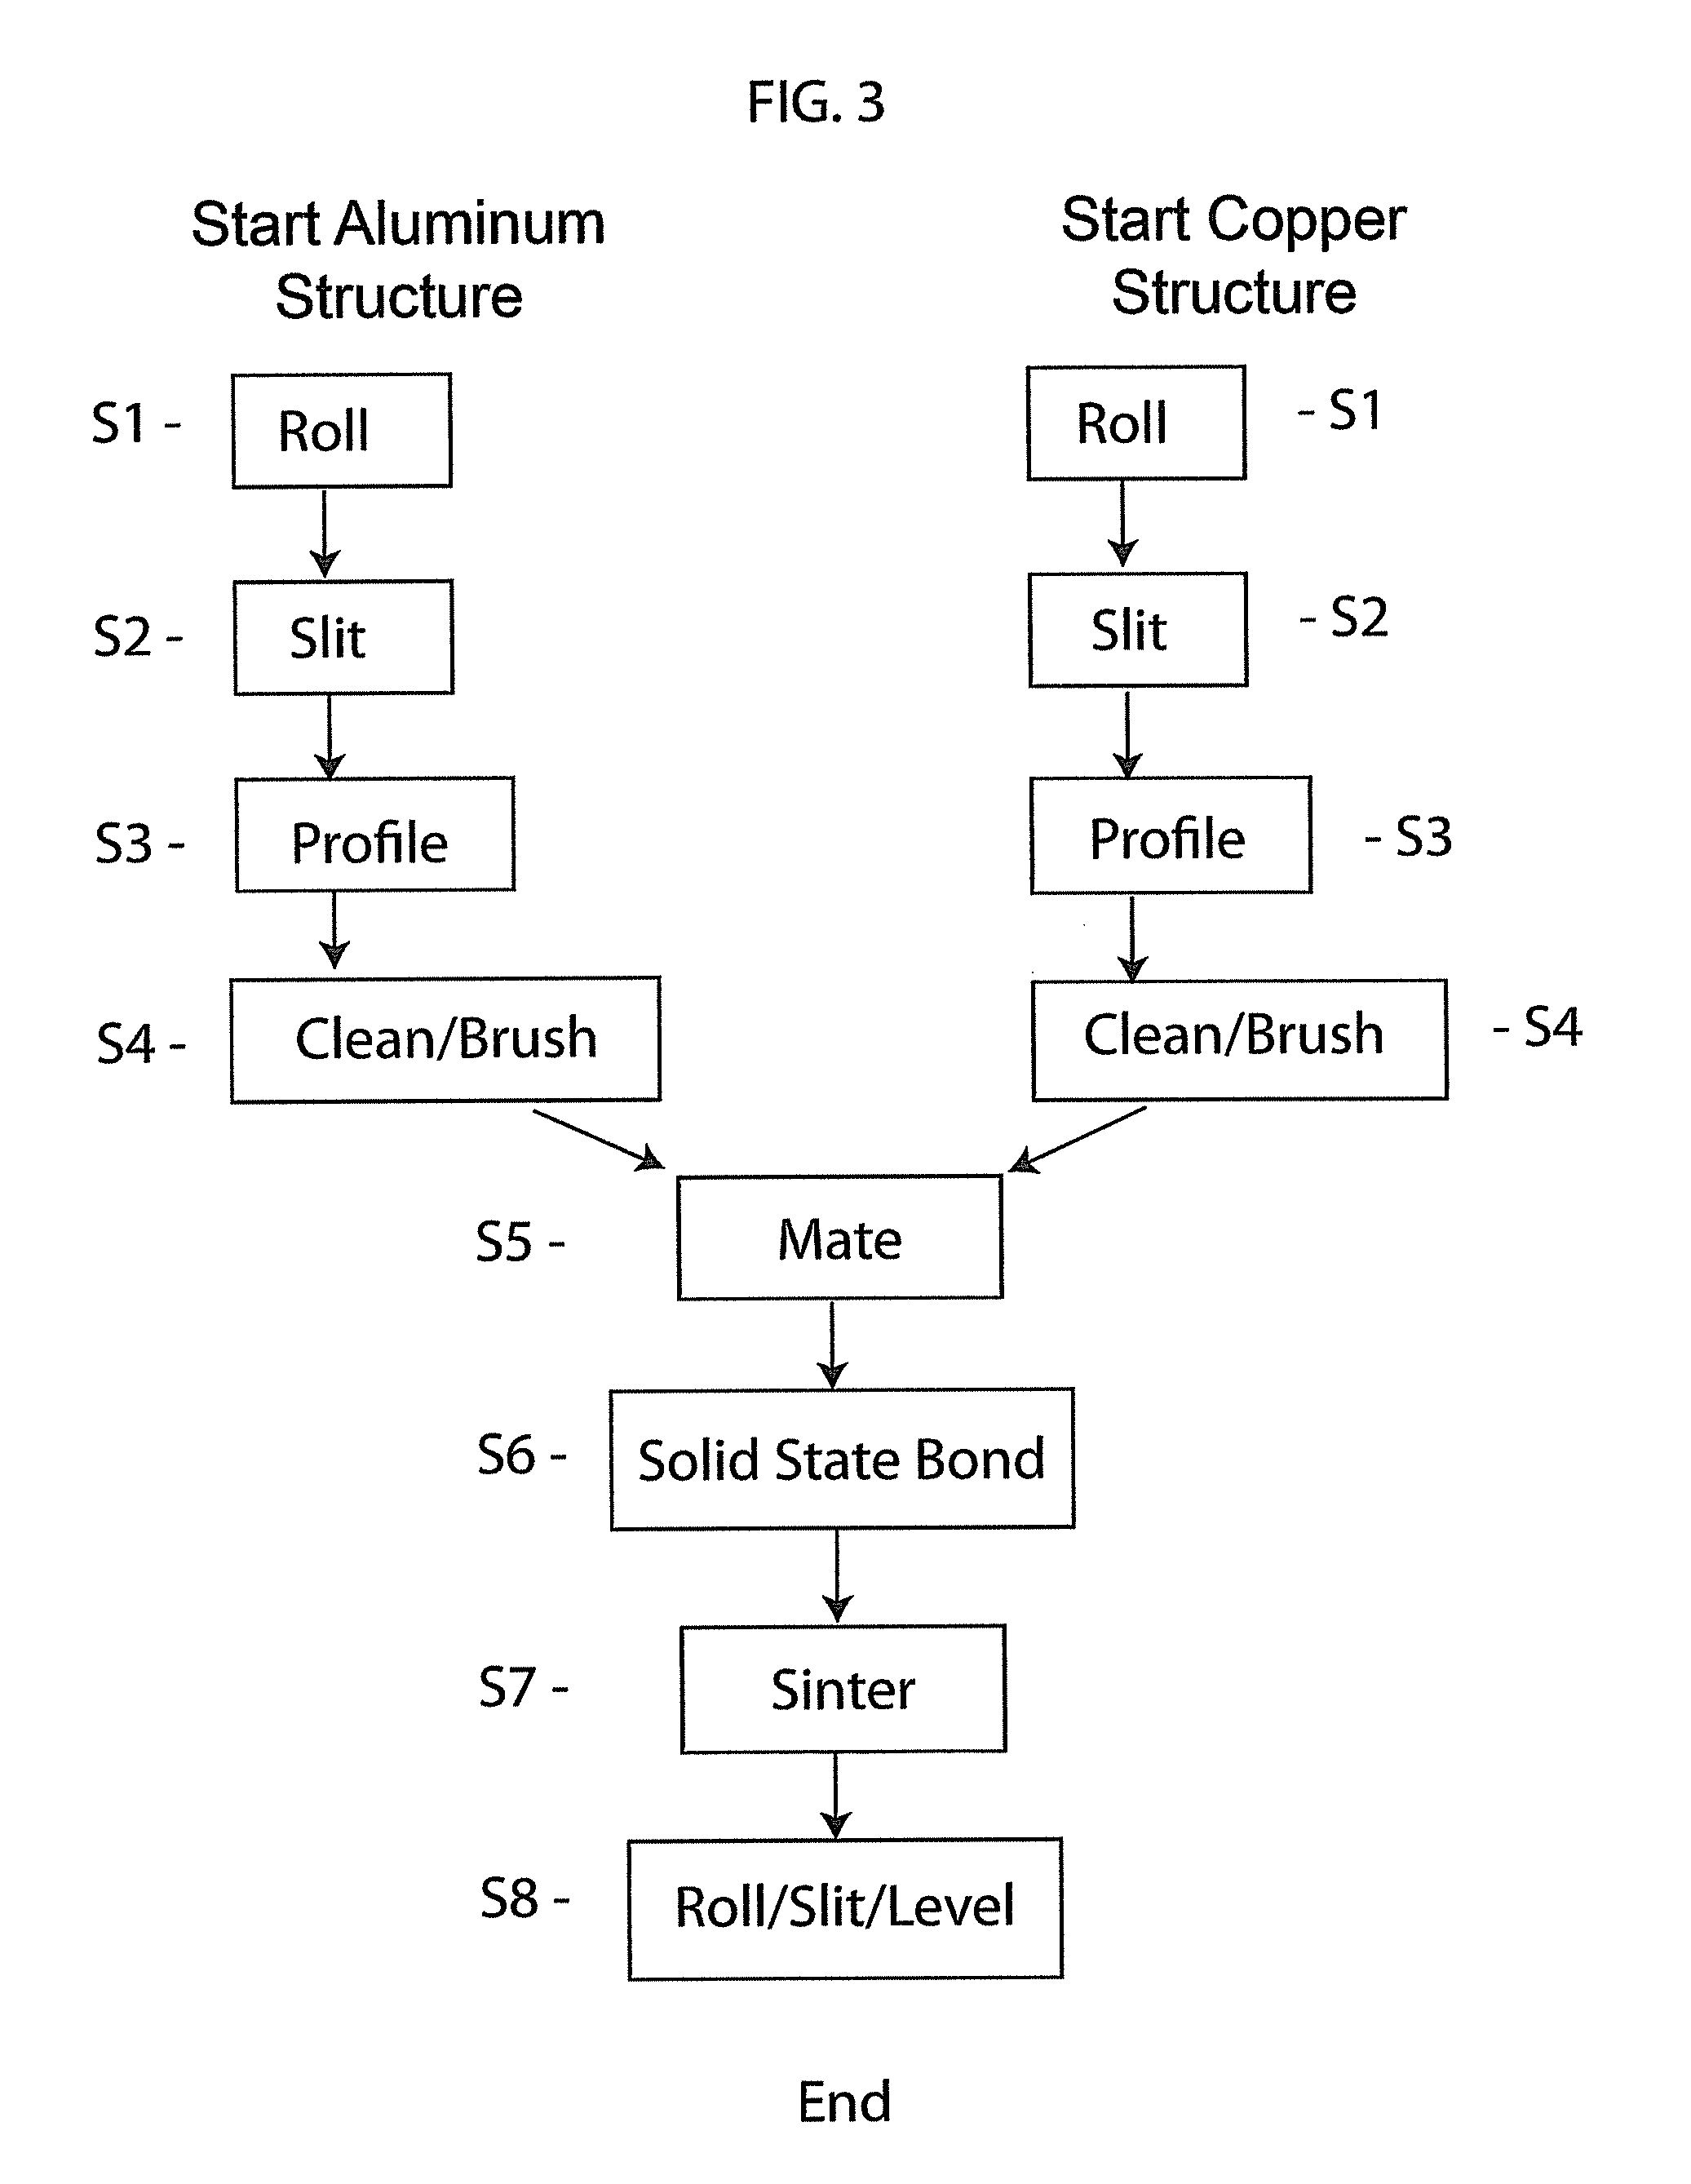 Methods for creating side-by-side metallic bonds between different materials using solid-phase bonding and the products produced thereby